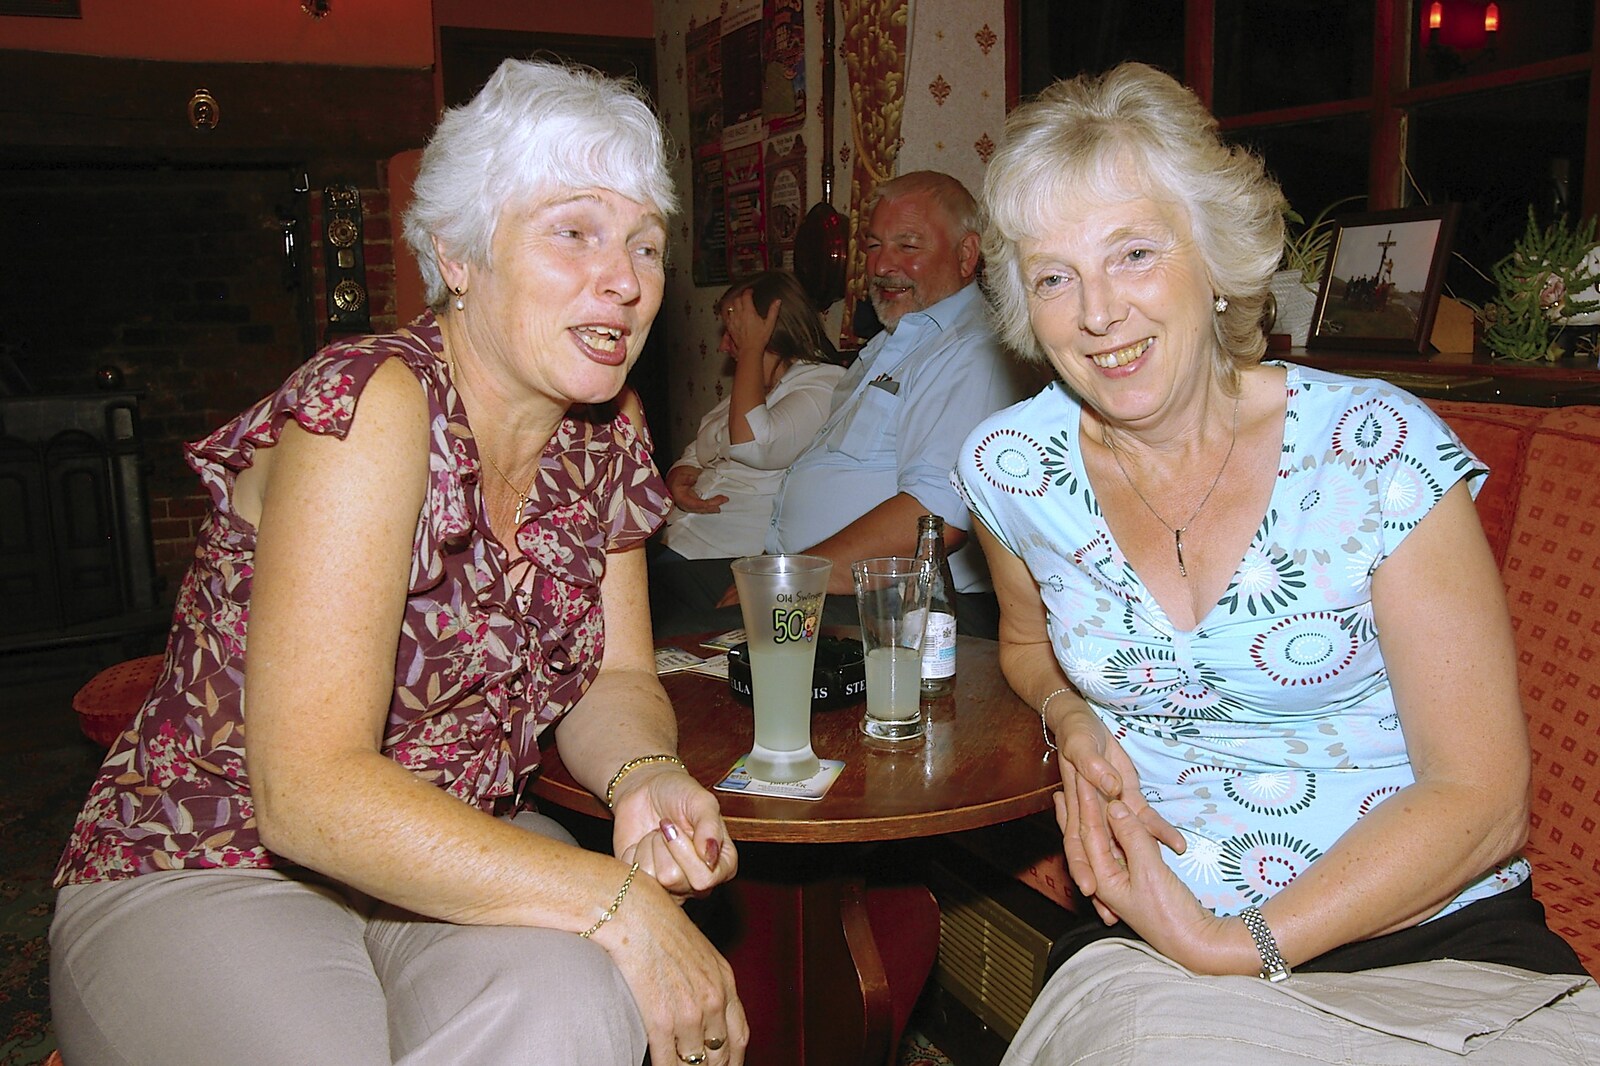 Spammy and Jean from Alan's Birthday at the Swan Inn, Brome, Suffolk - 18th August 2006